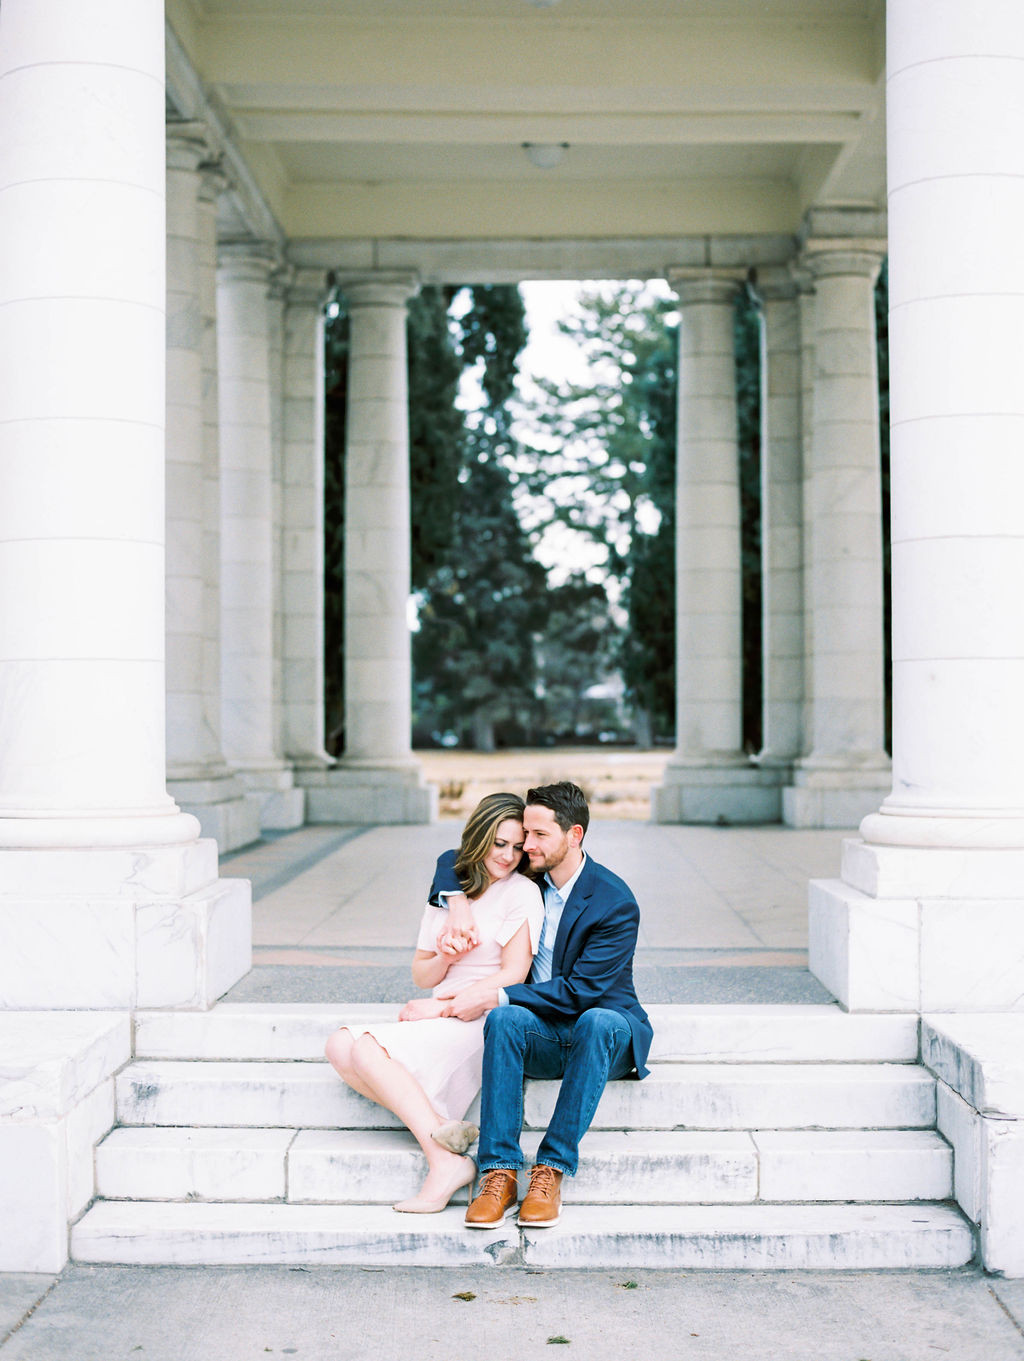 Destination engagement session in Colorado on film